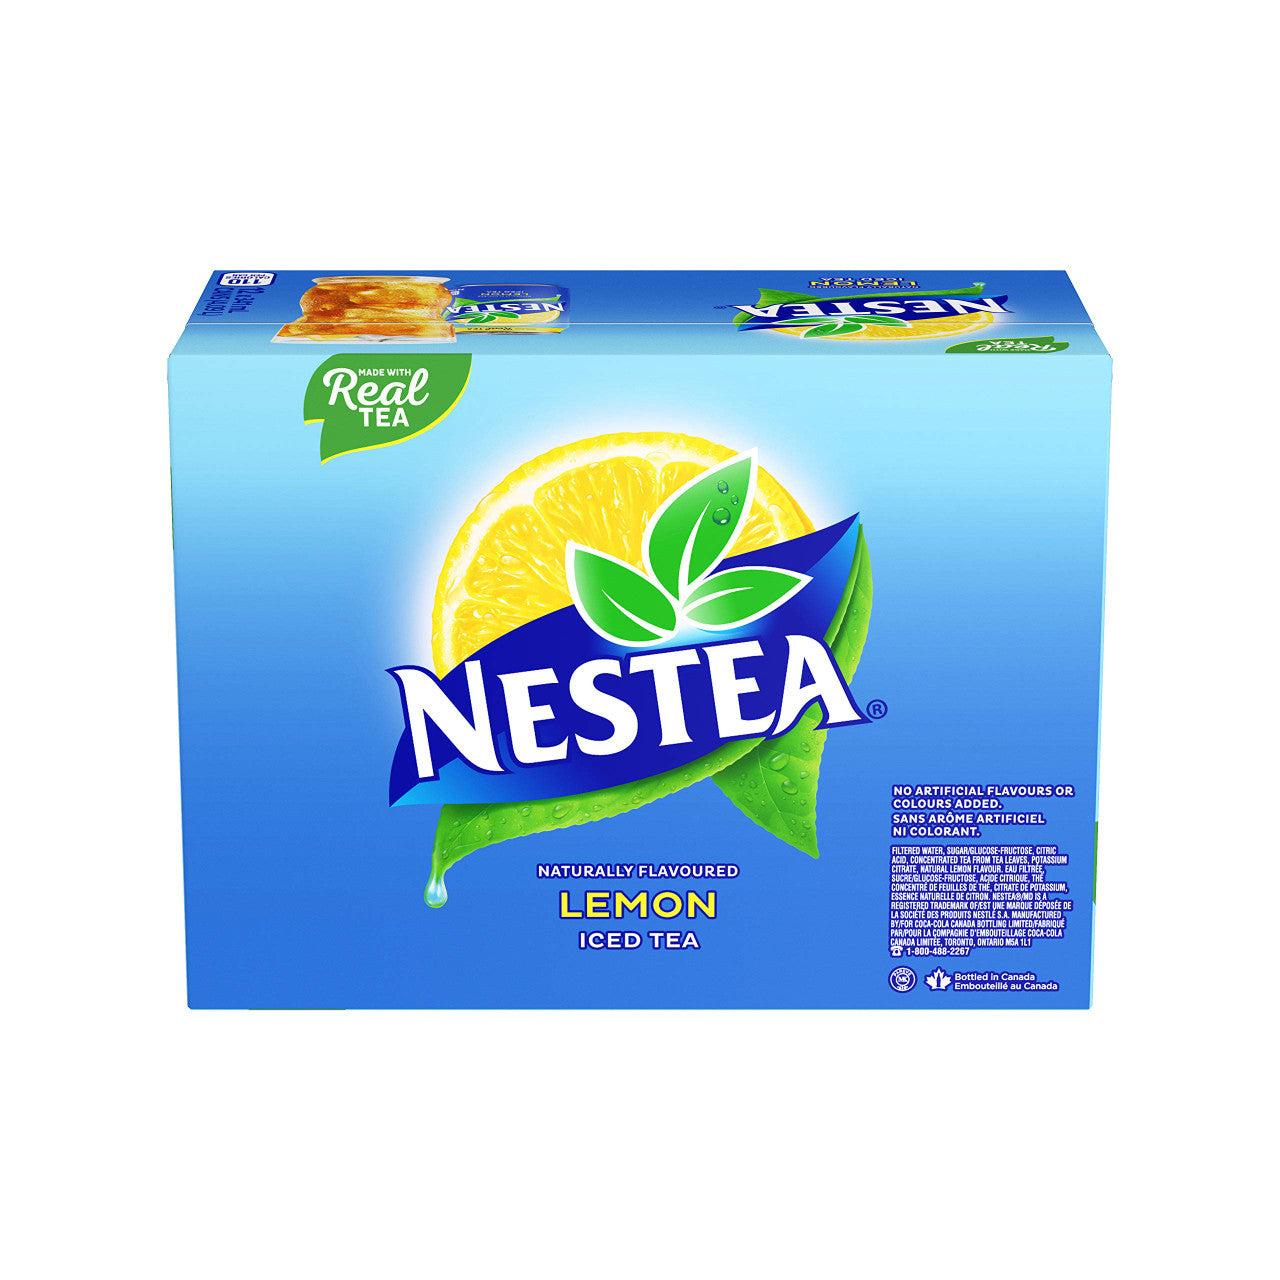 Nestea Lemon Soft Drinks, 341mL/11.5oz., cans, Pack of 12, {Imported from Canada}